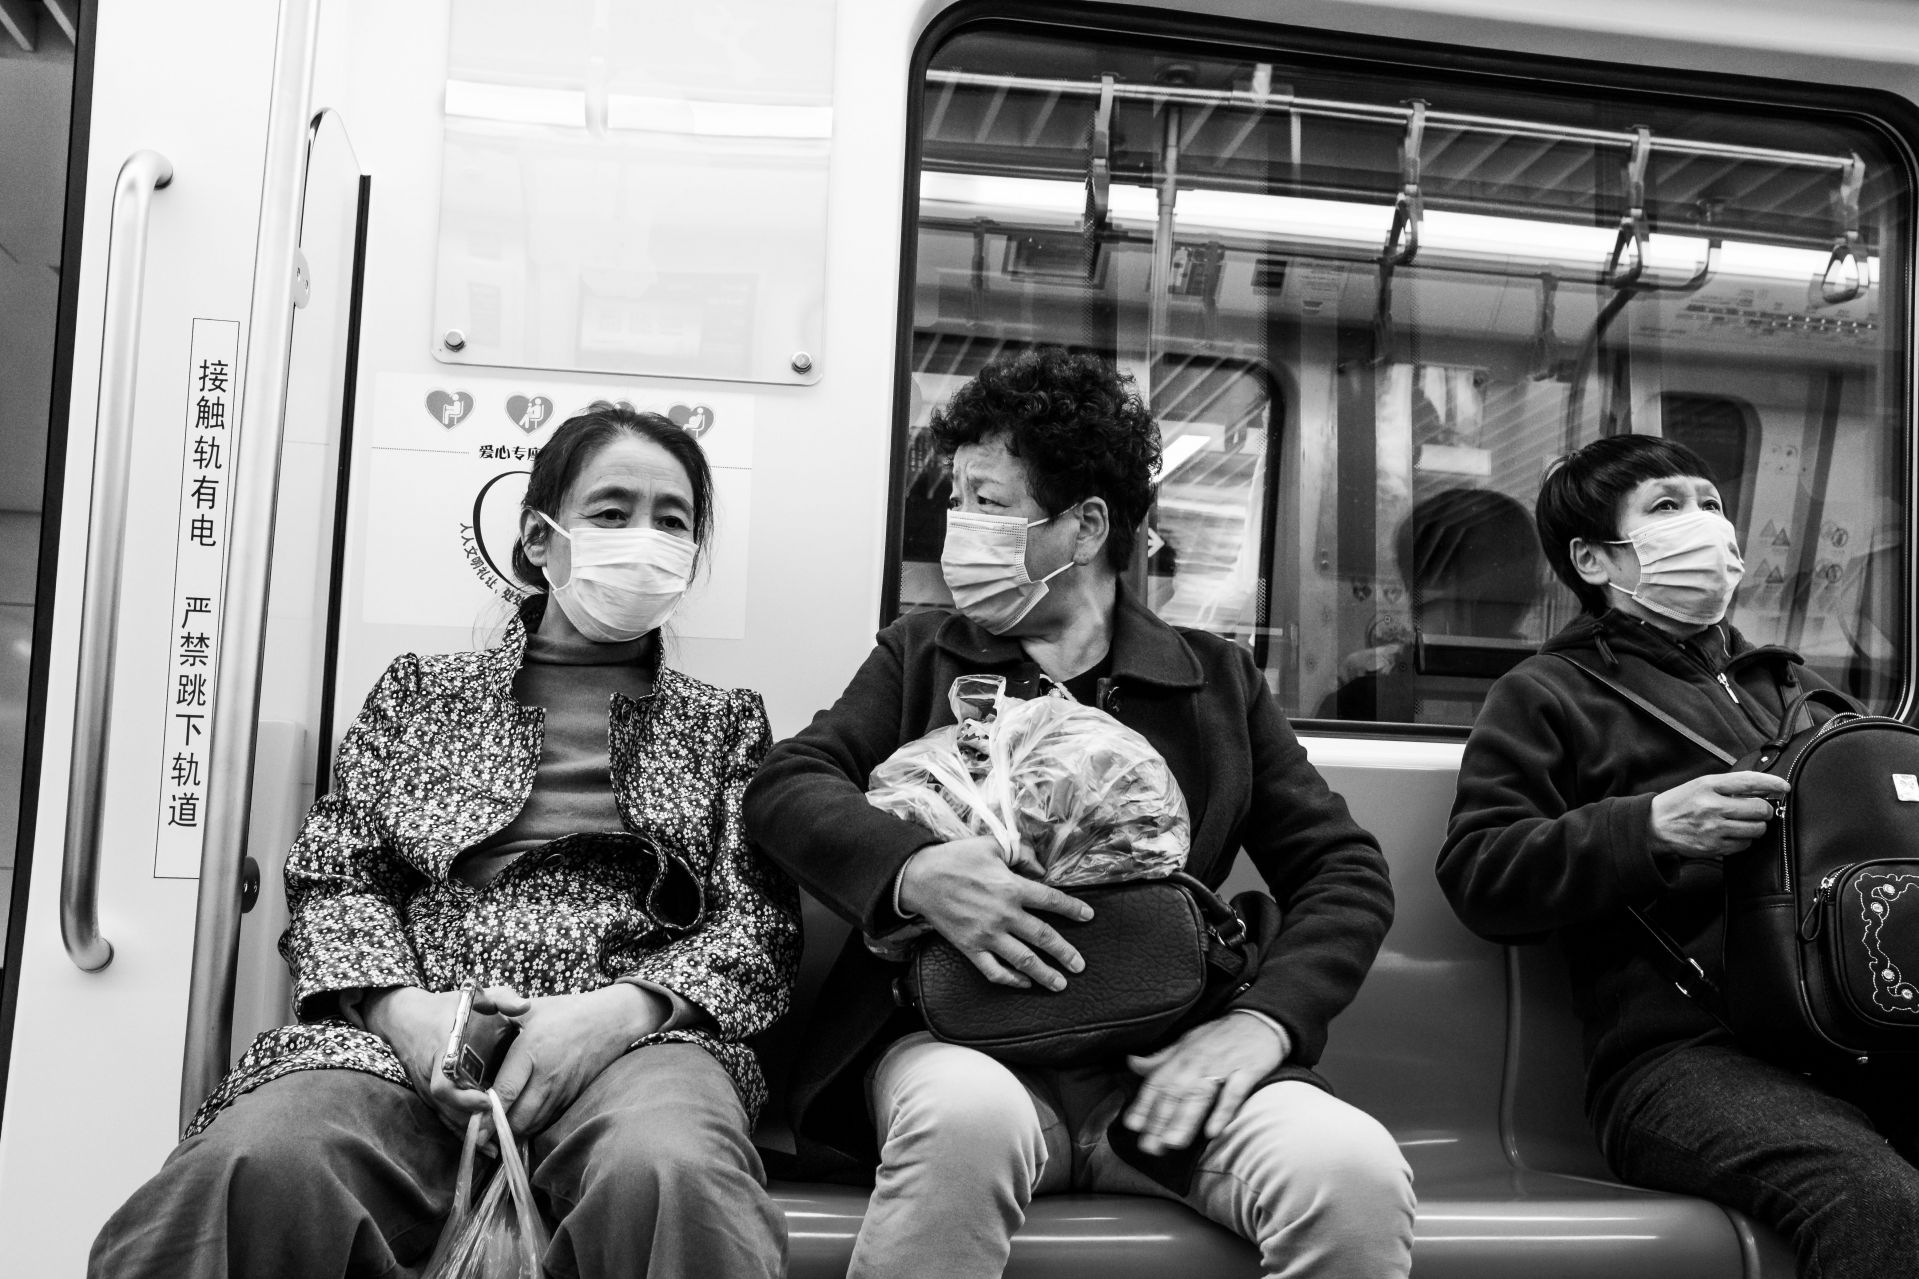 Metro riders wear masks in Qingdao, China, in November 2020. (Photograph by Gauthier Delecroix)
